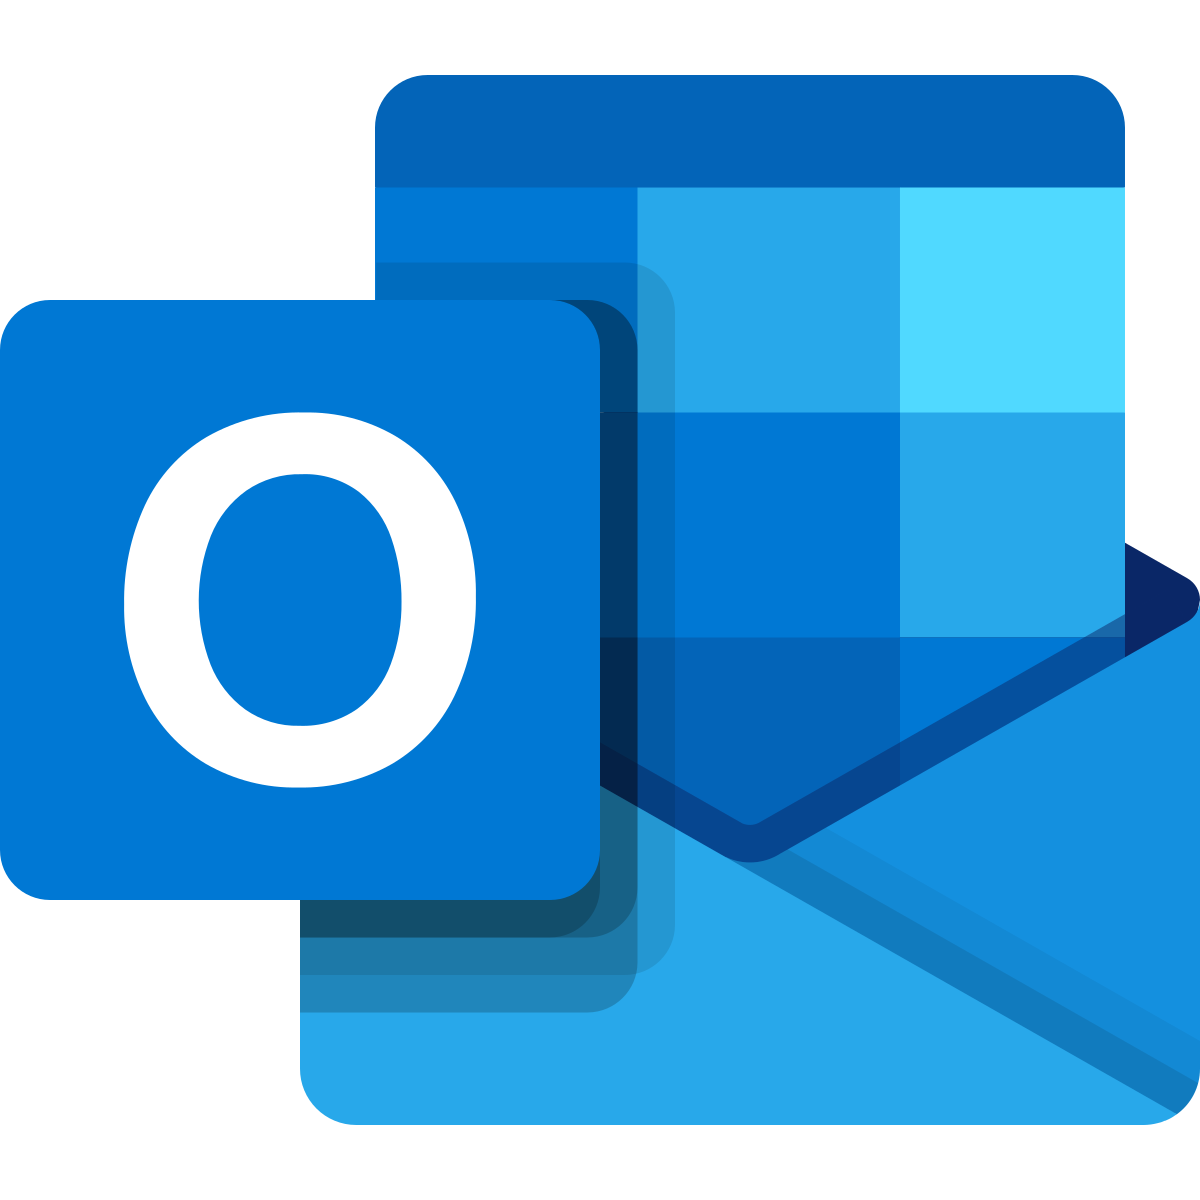 Outlook email and calendar resources